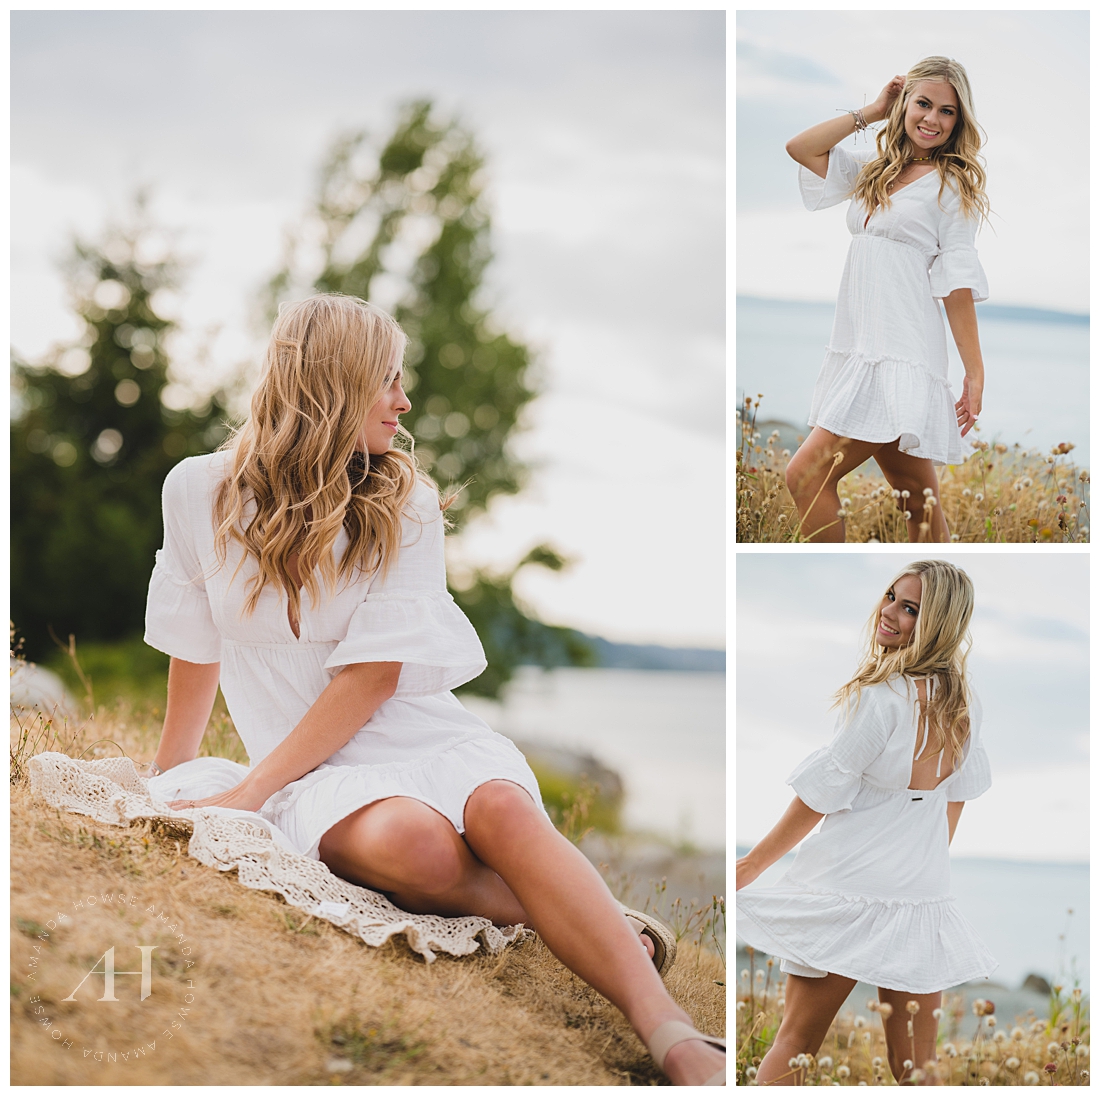 Posing with Blanket for Summer Photos | Posing Guide, Senior Session | Photographed by the Best Tacoma Senior Photographer Amanda Howse Photography